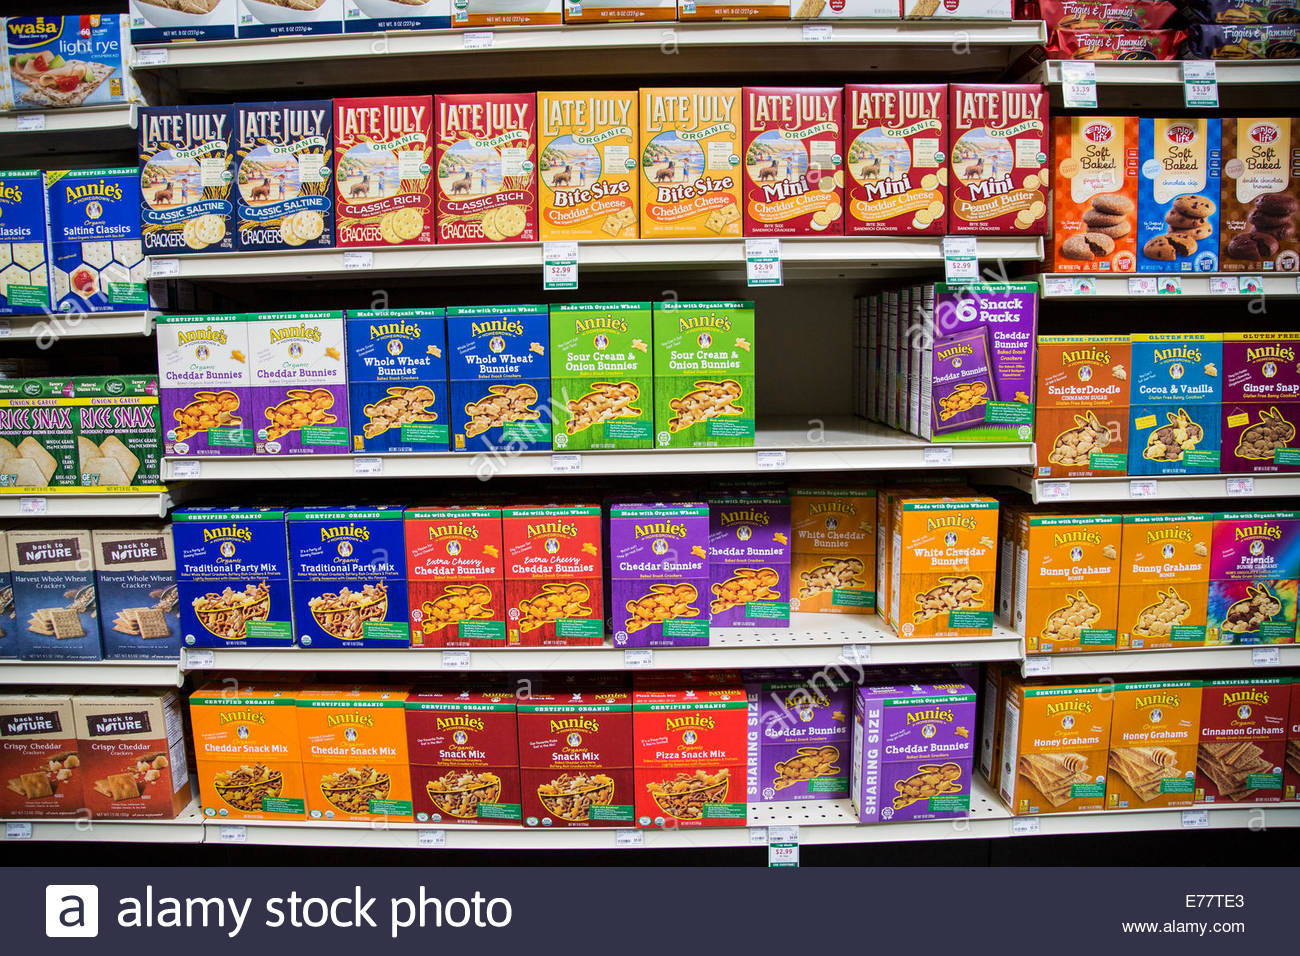 Healthy Snacks To Buy At The Store
 A natural foods grocery store aisle with shelves of